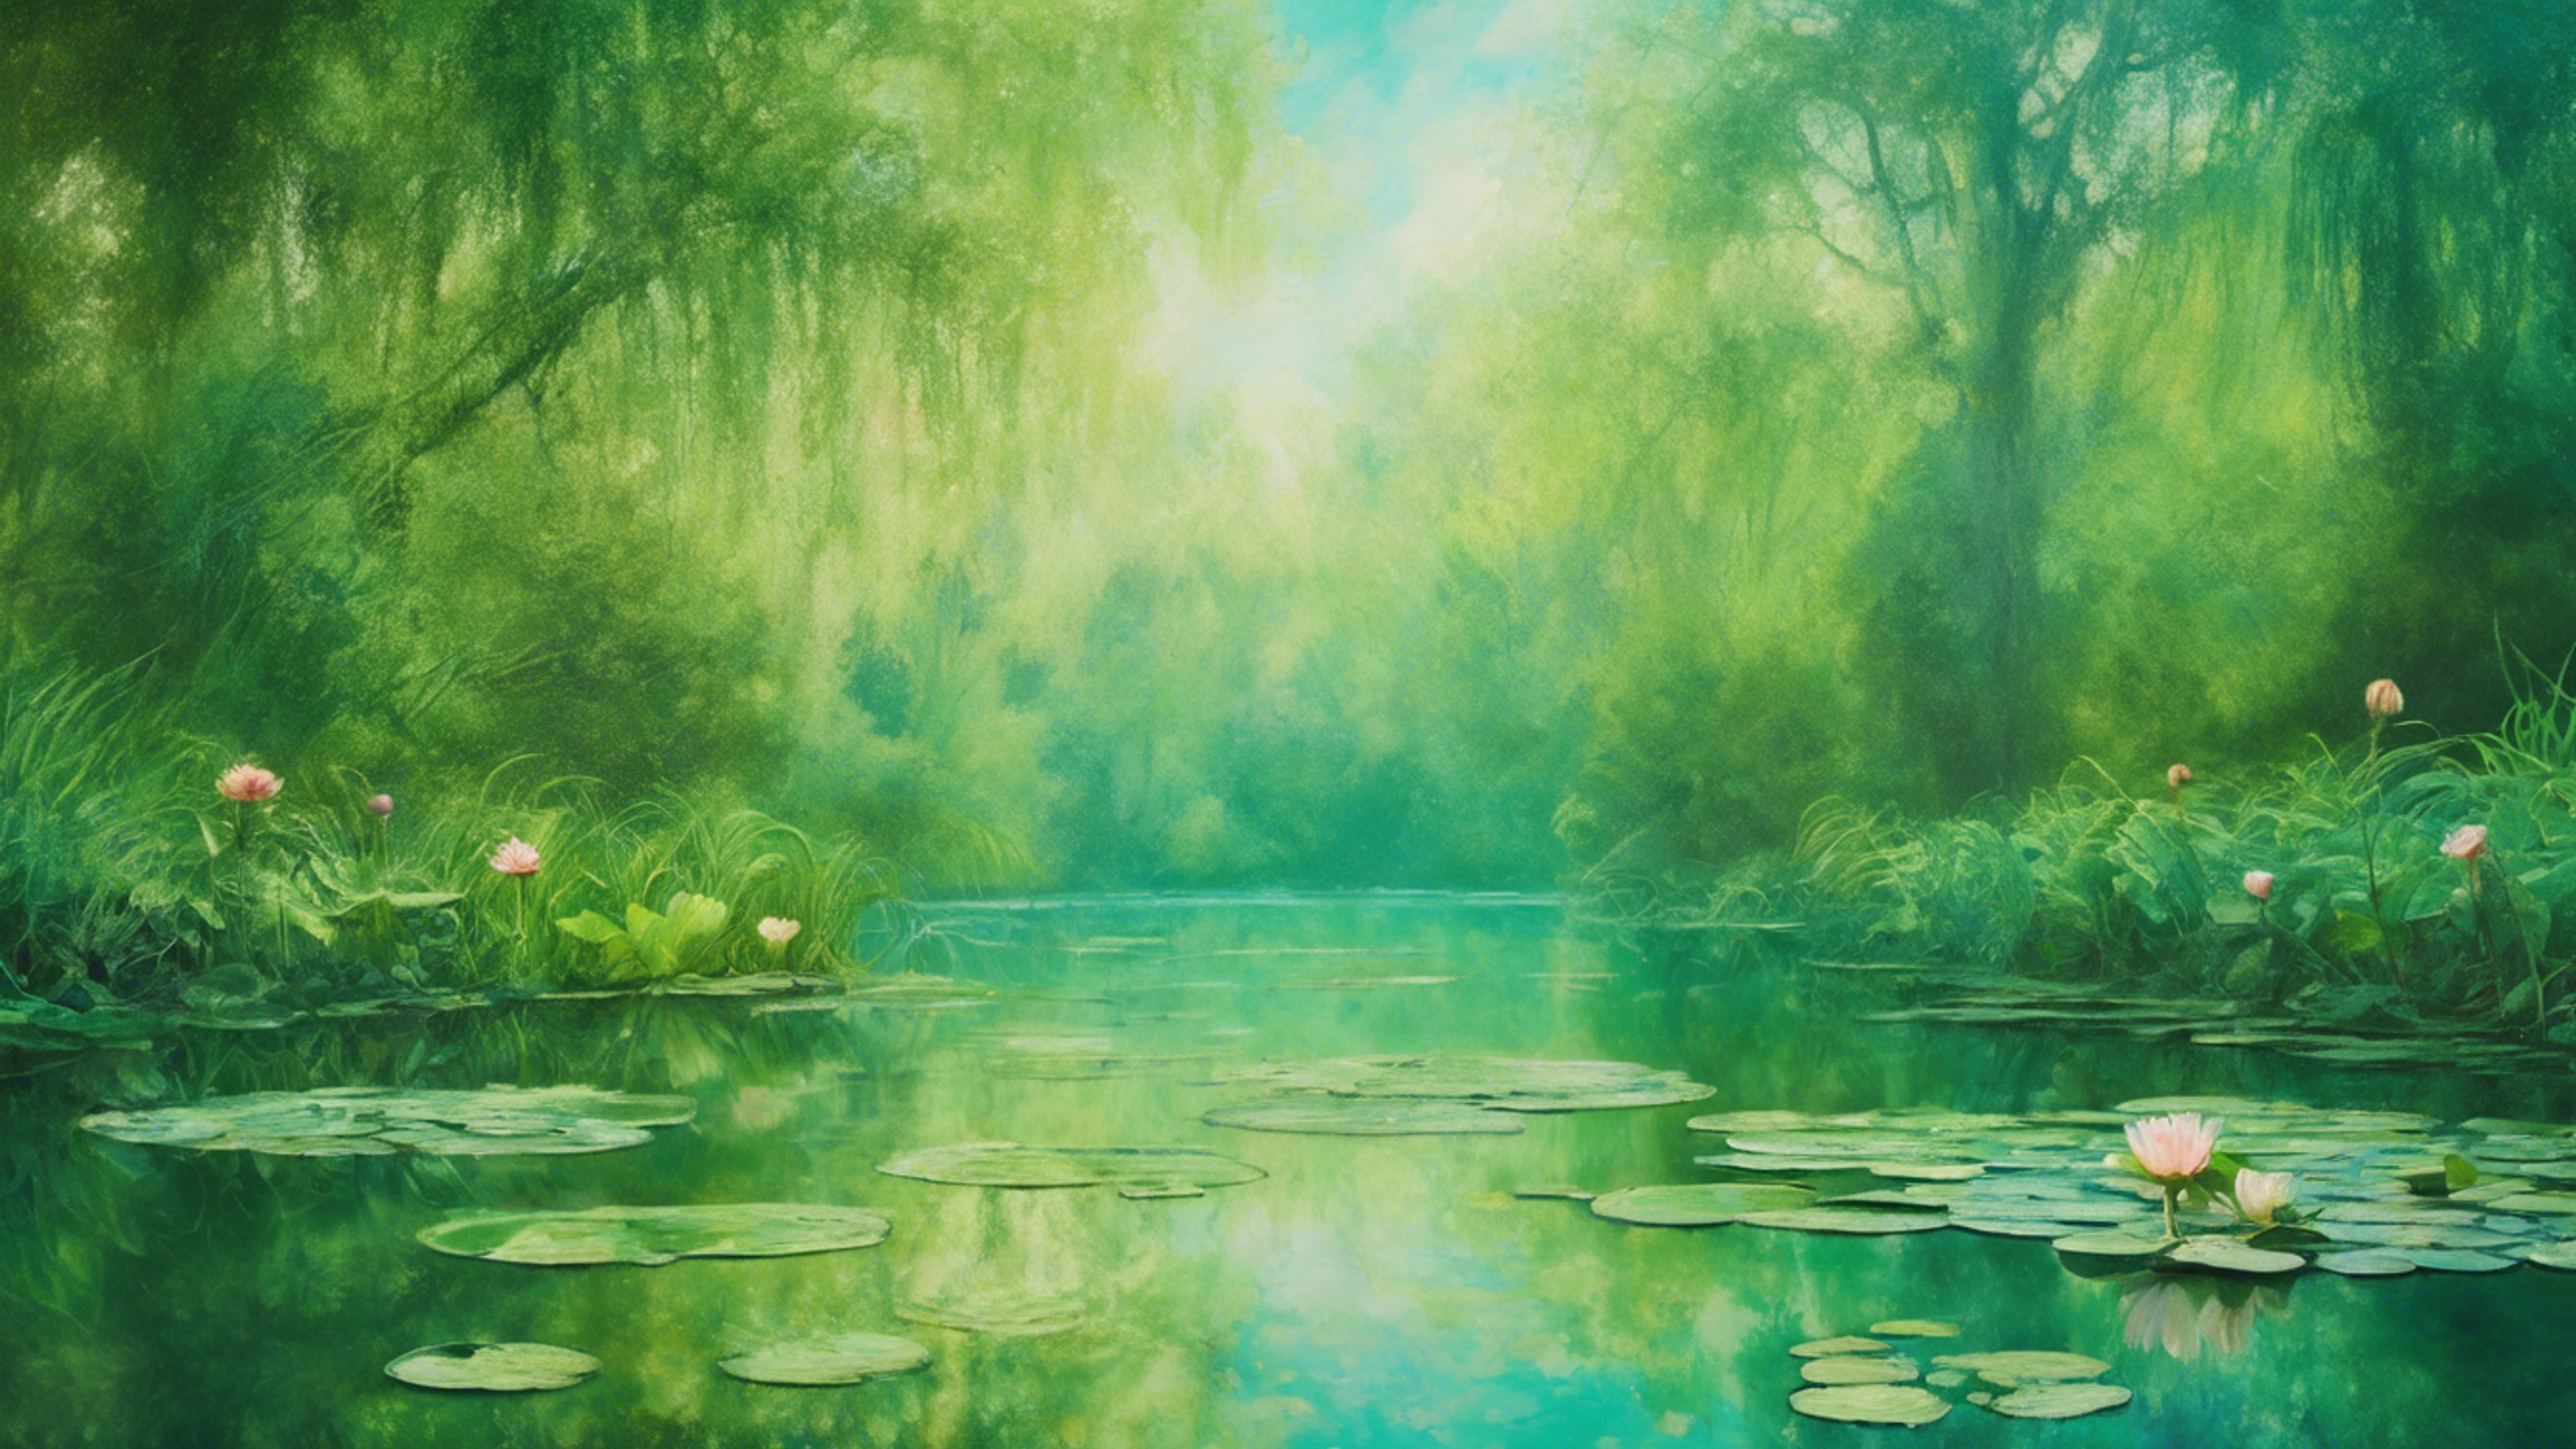 A landscape painting inspired by Monet's Water Lilies, with cool green hues. کاغذ دیواری[9f0abb477fe746e08ba1]